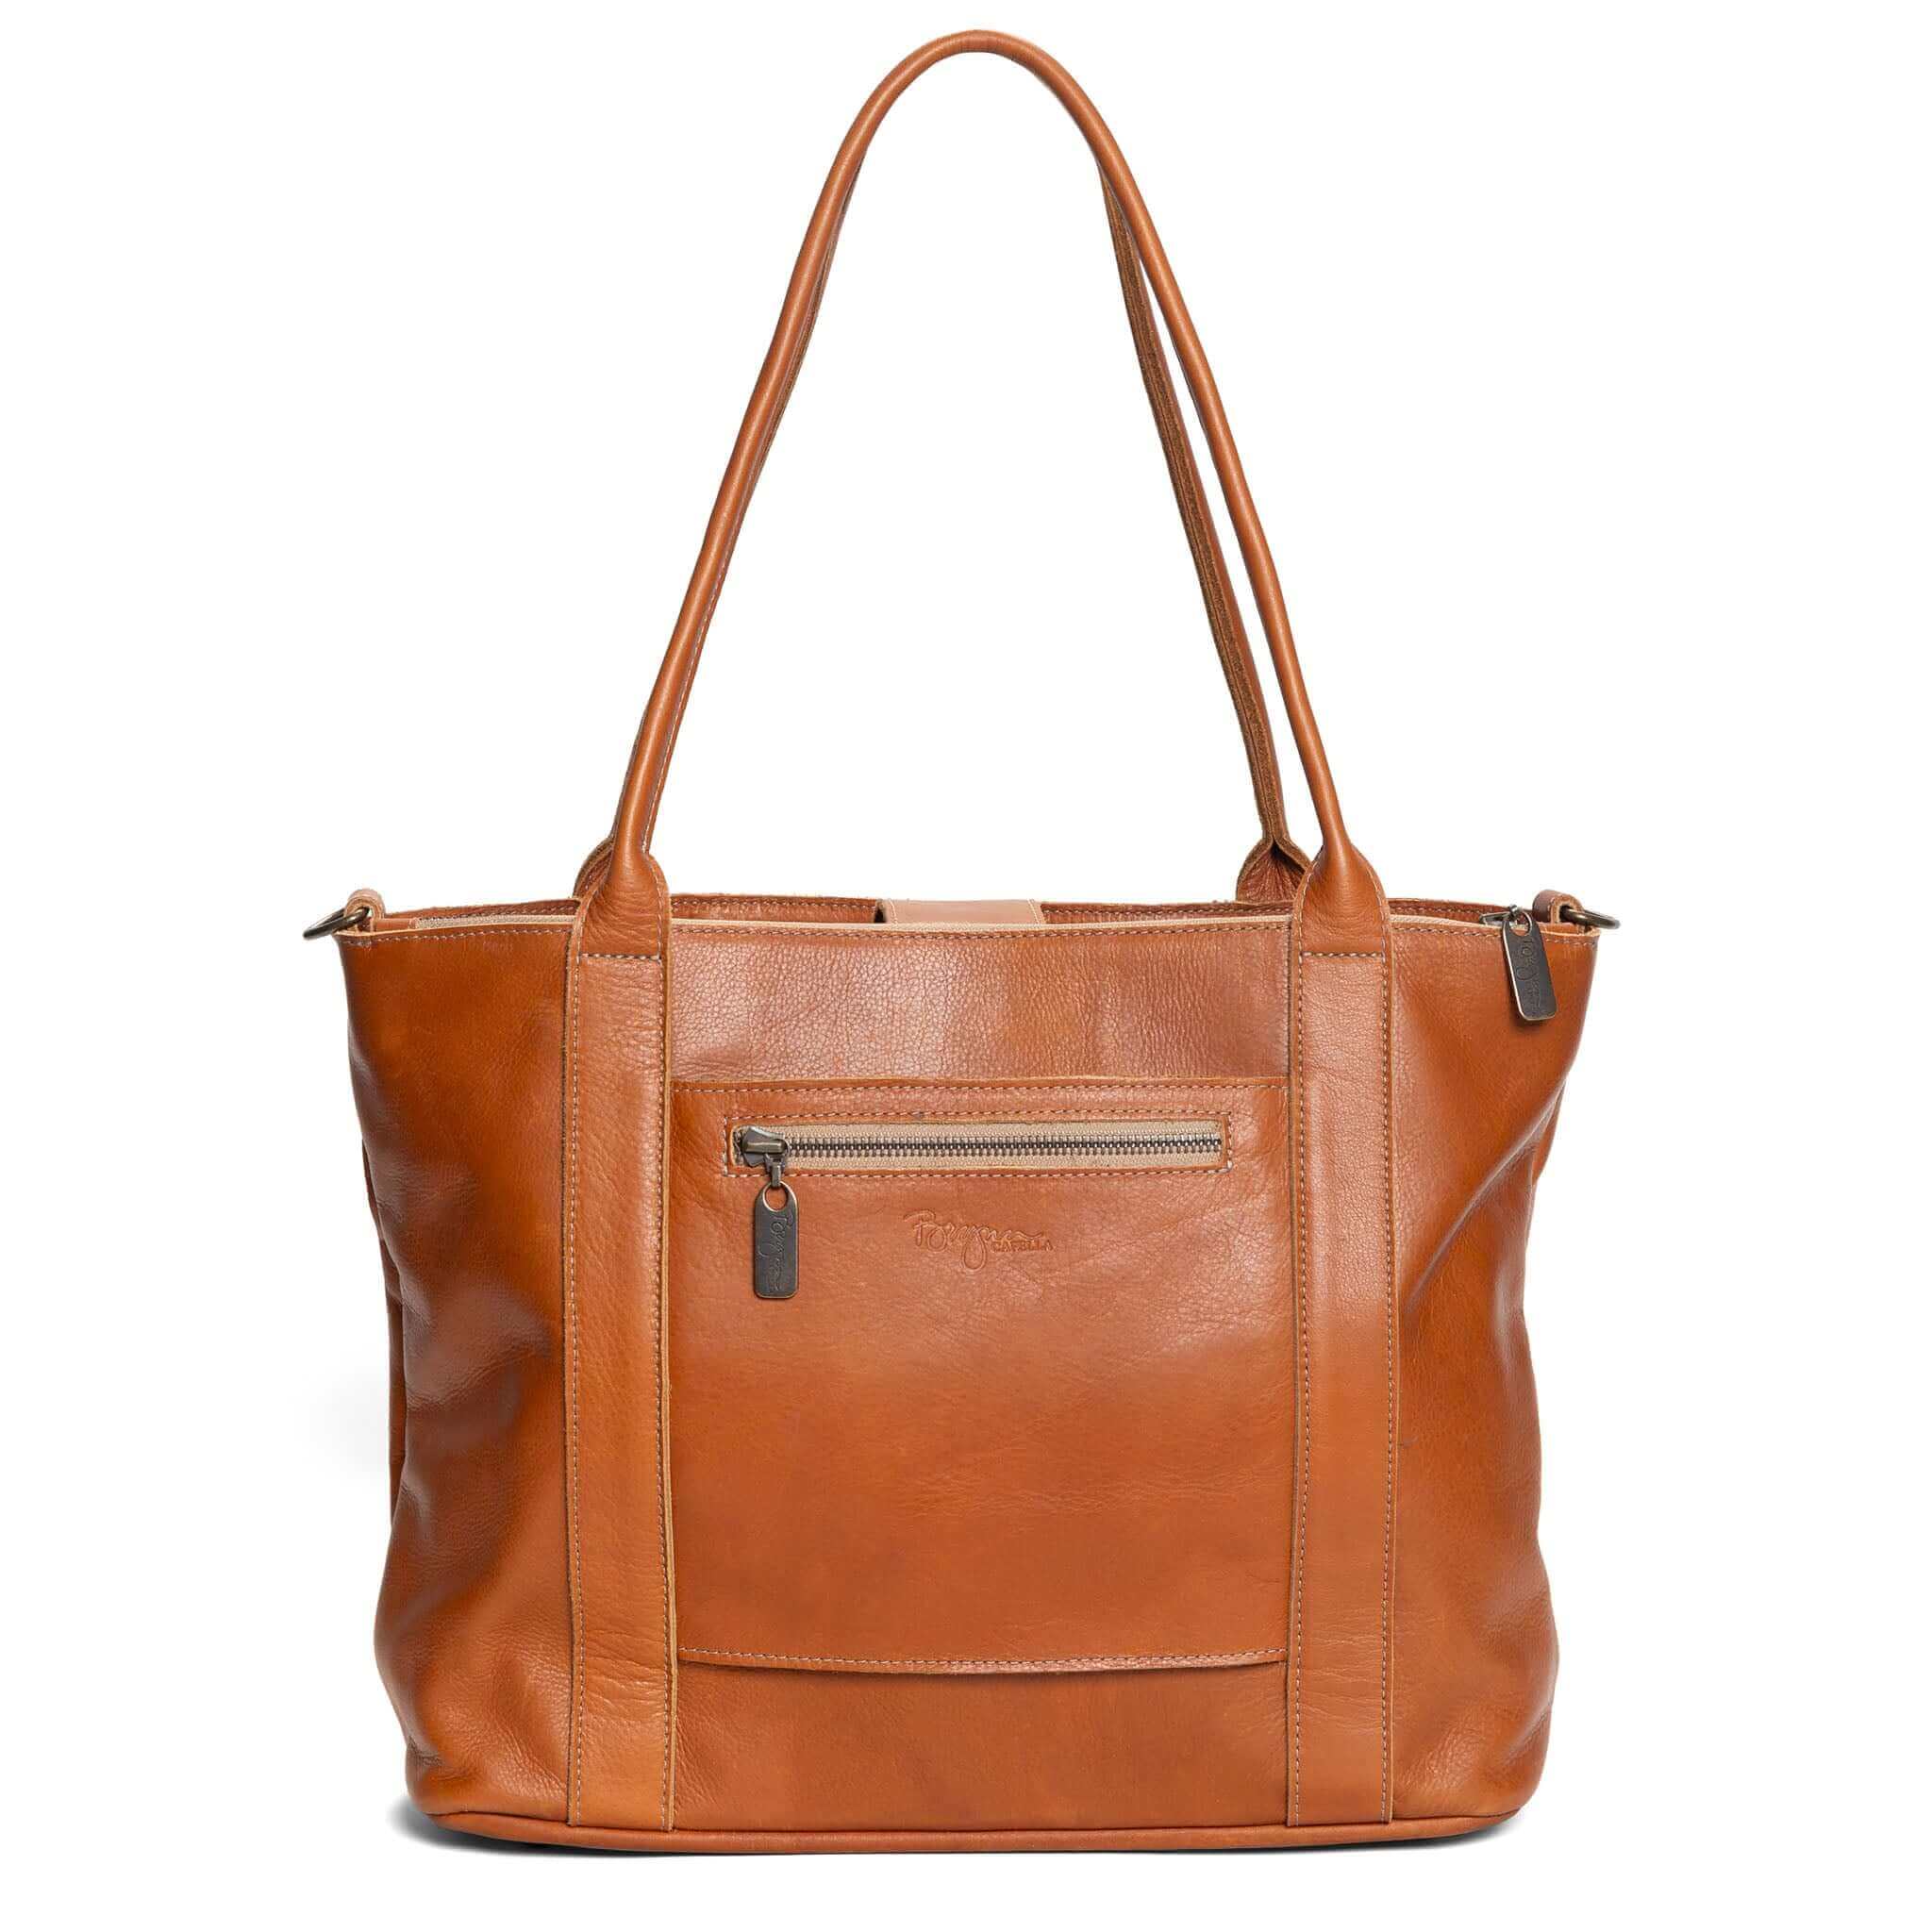 Meet The Perfect Tote | Brynn Capella, Made in USA